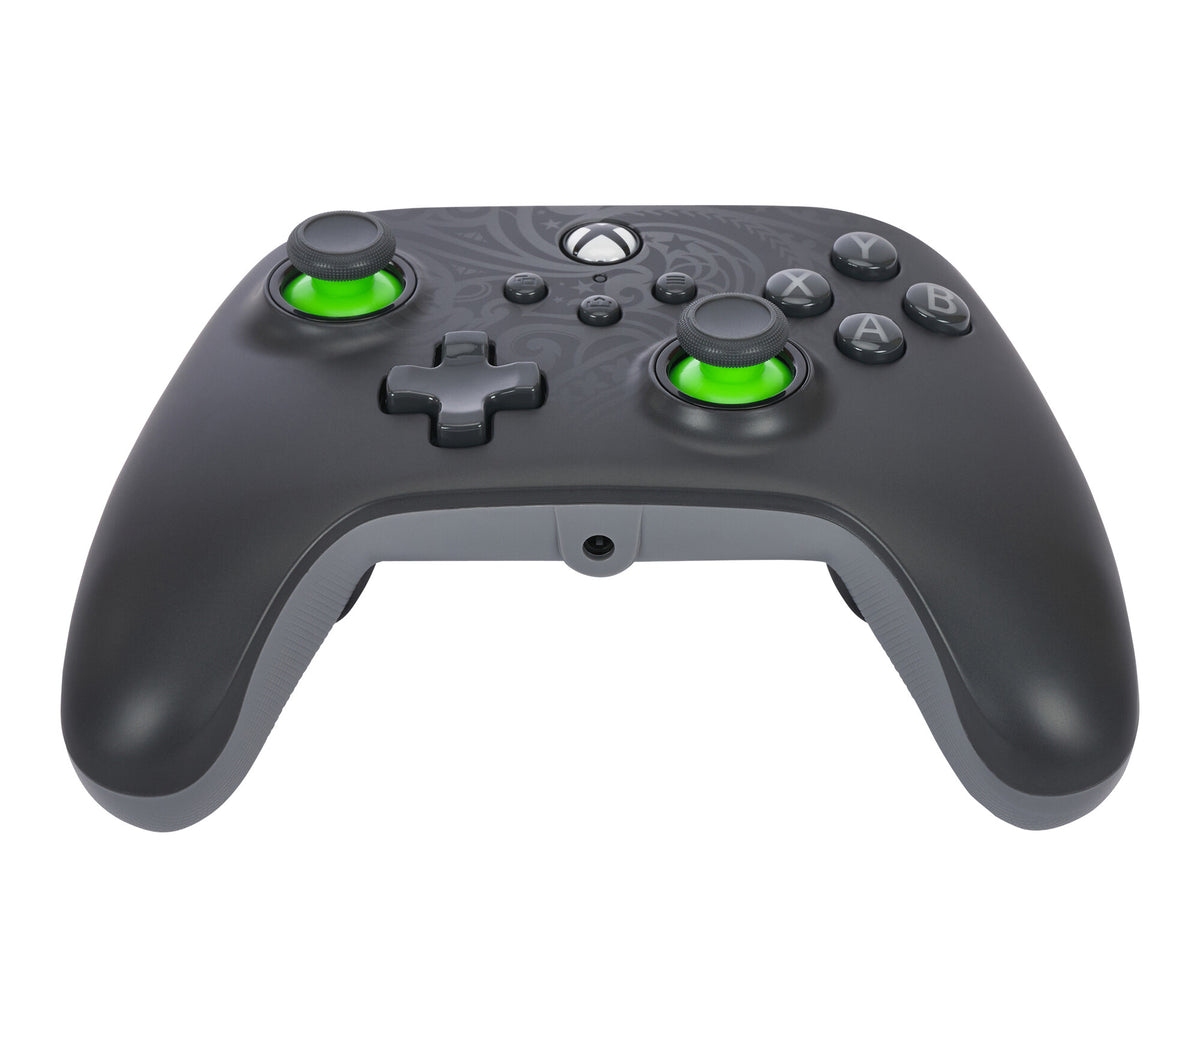 PowerA Advantage Wired Gaming Controller for PC / Xbox Series X|S in Black / Lime